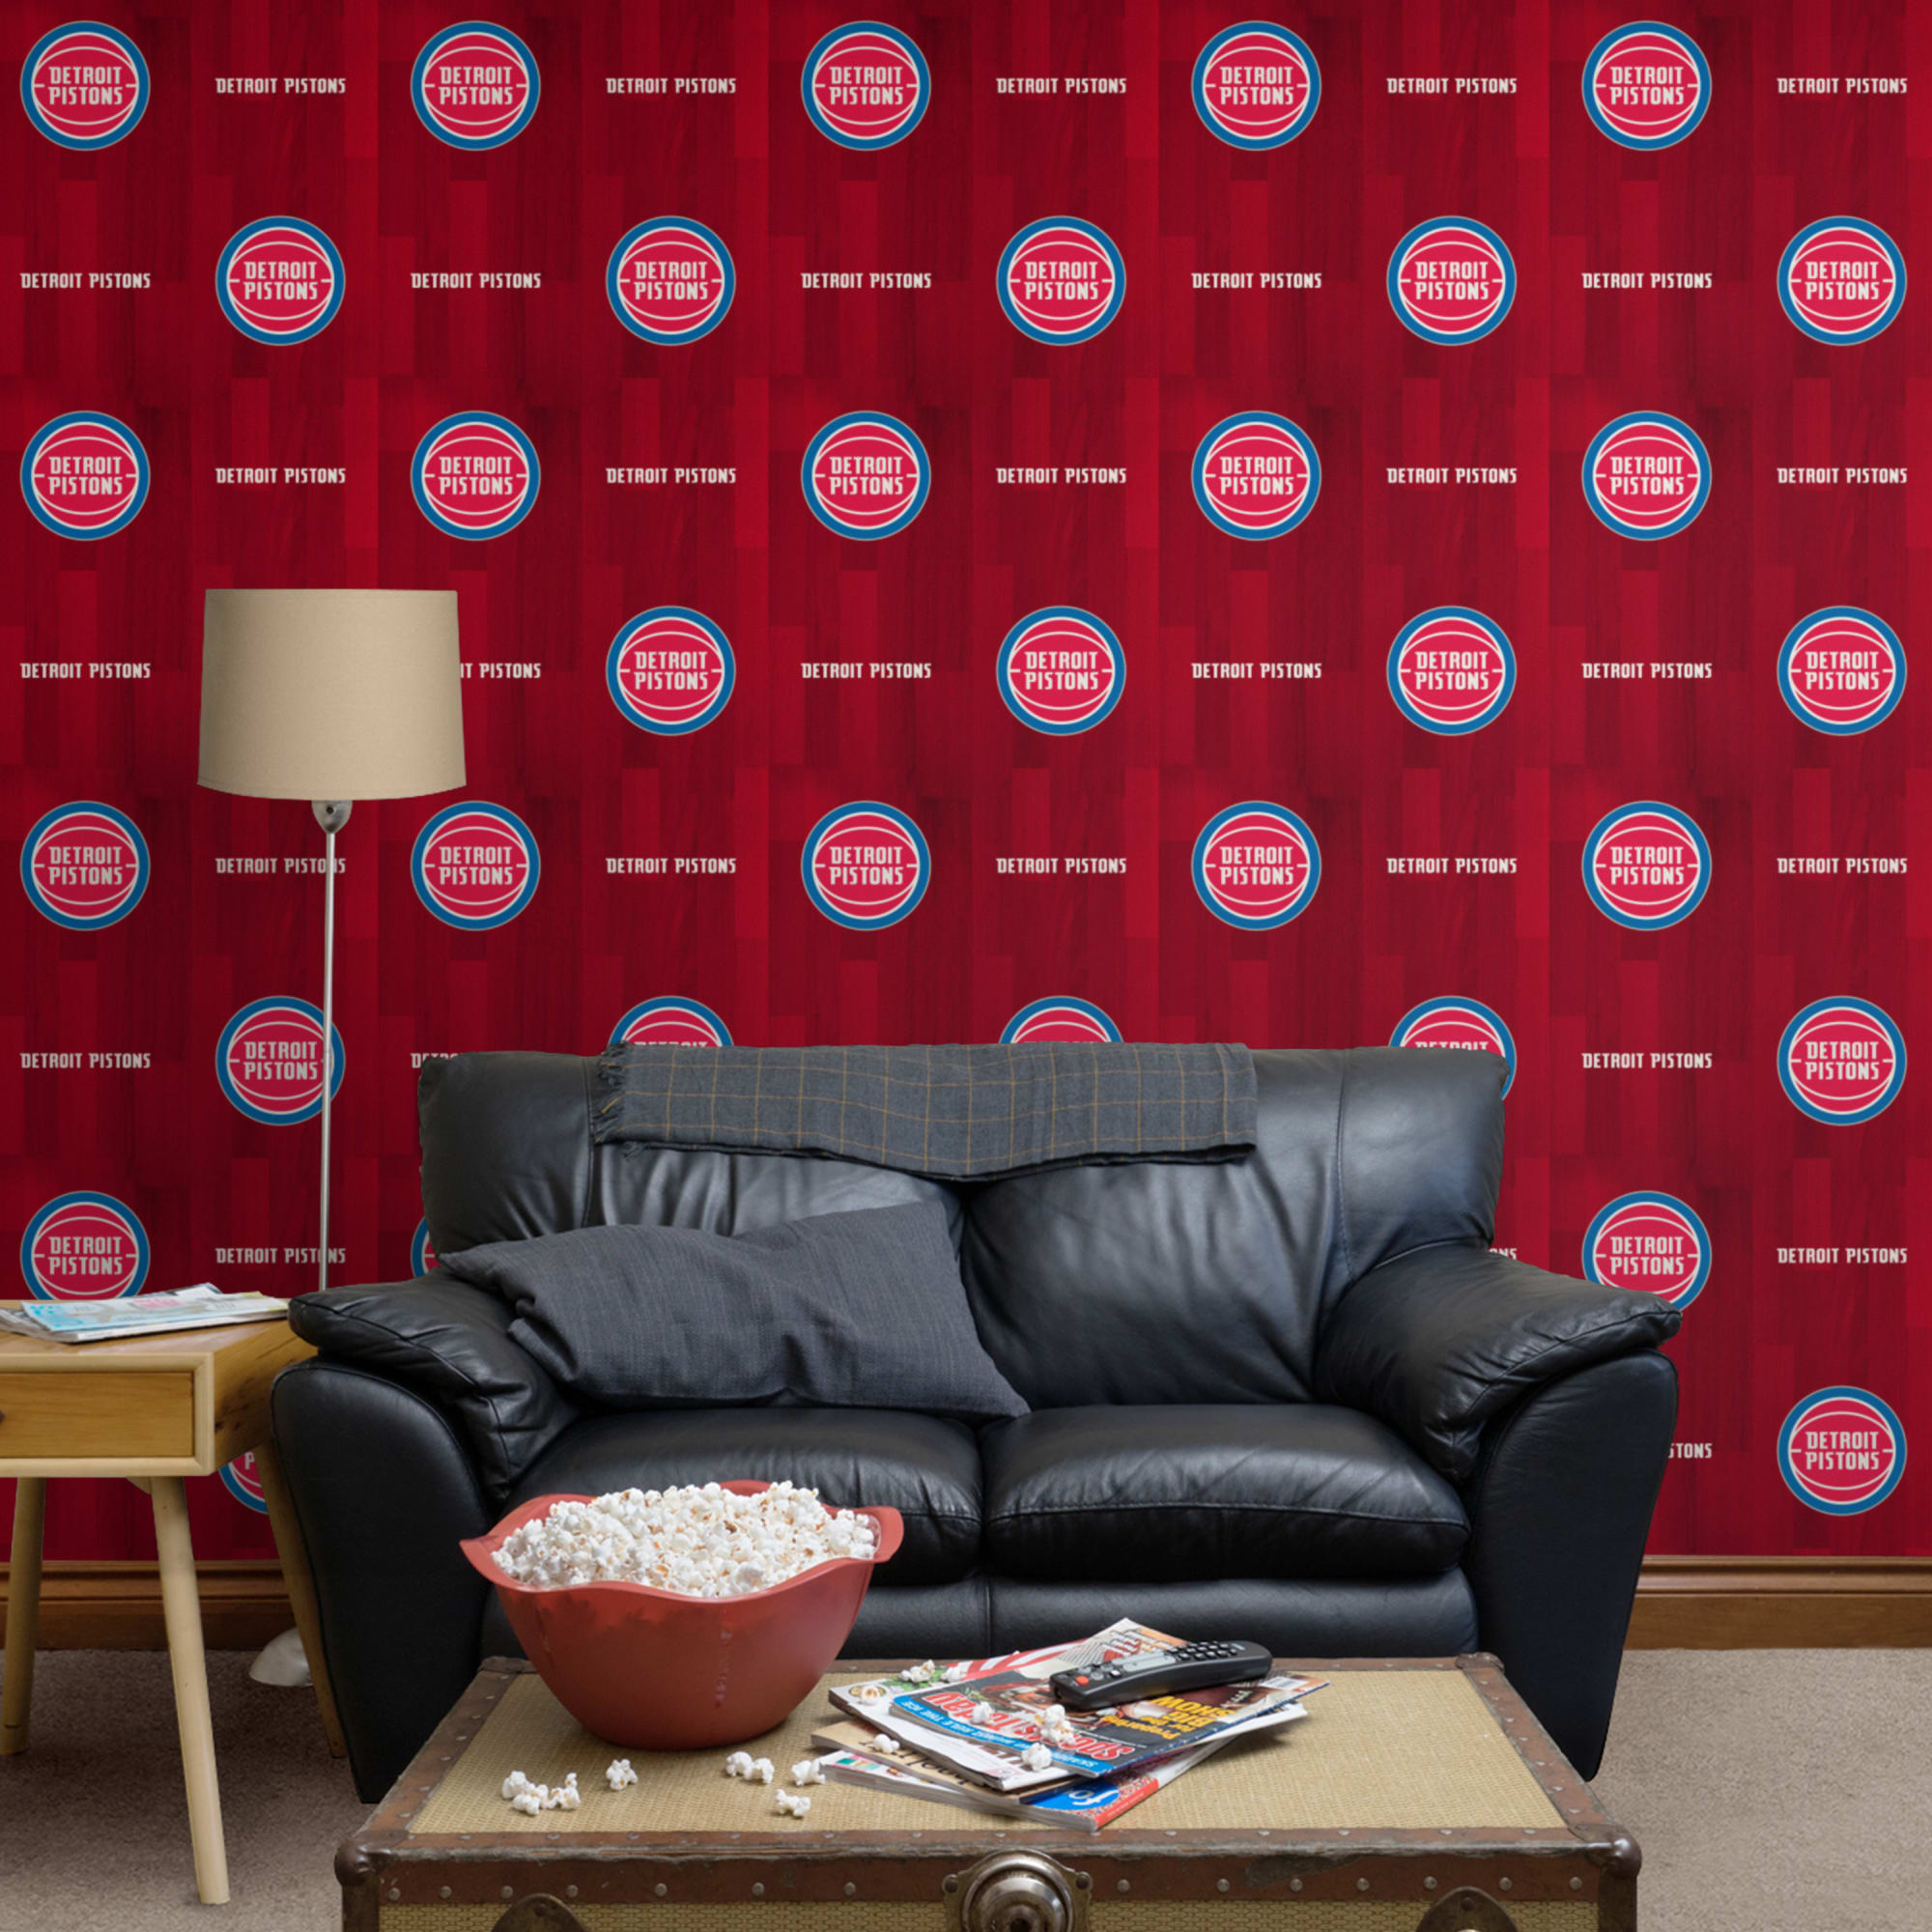 Detroit Pistons: Hardwood Pattern - Officially Licensed Removable Wallpaper 12" x 12" Sample by Fathead